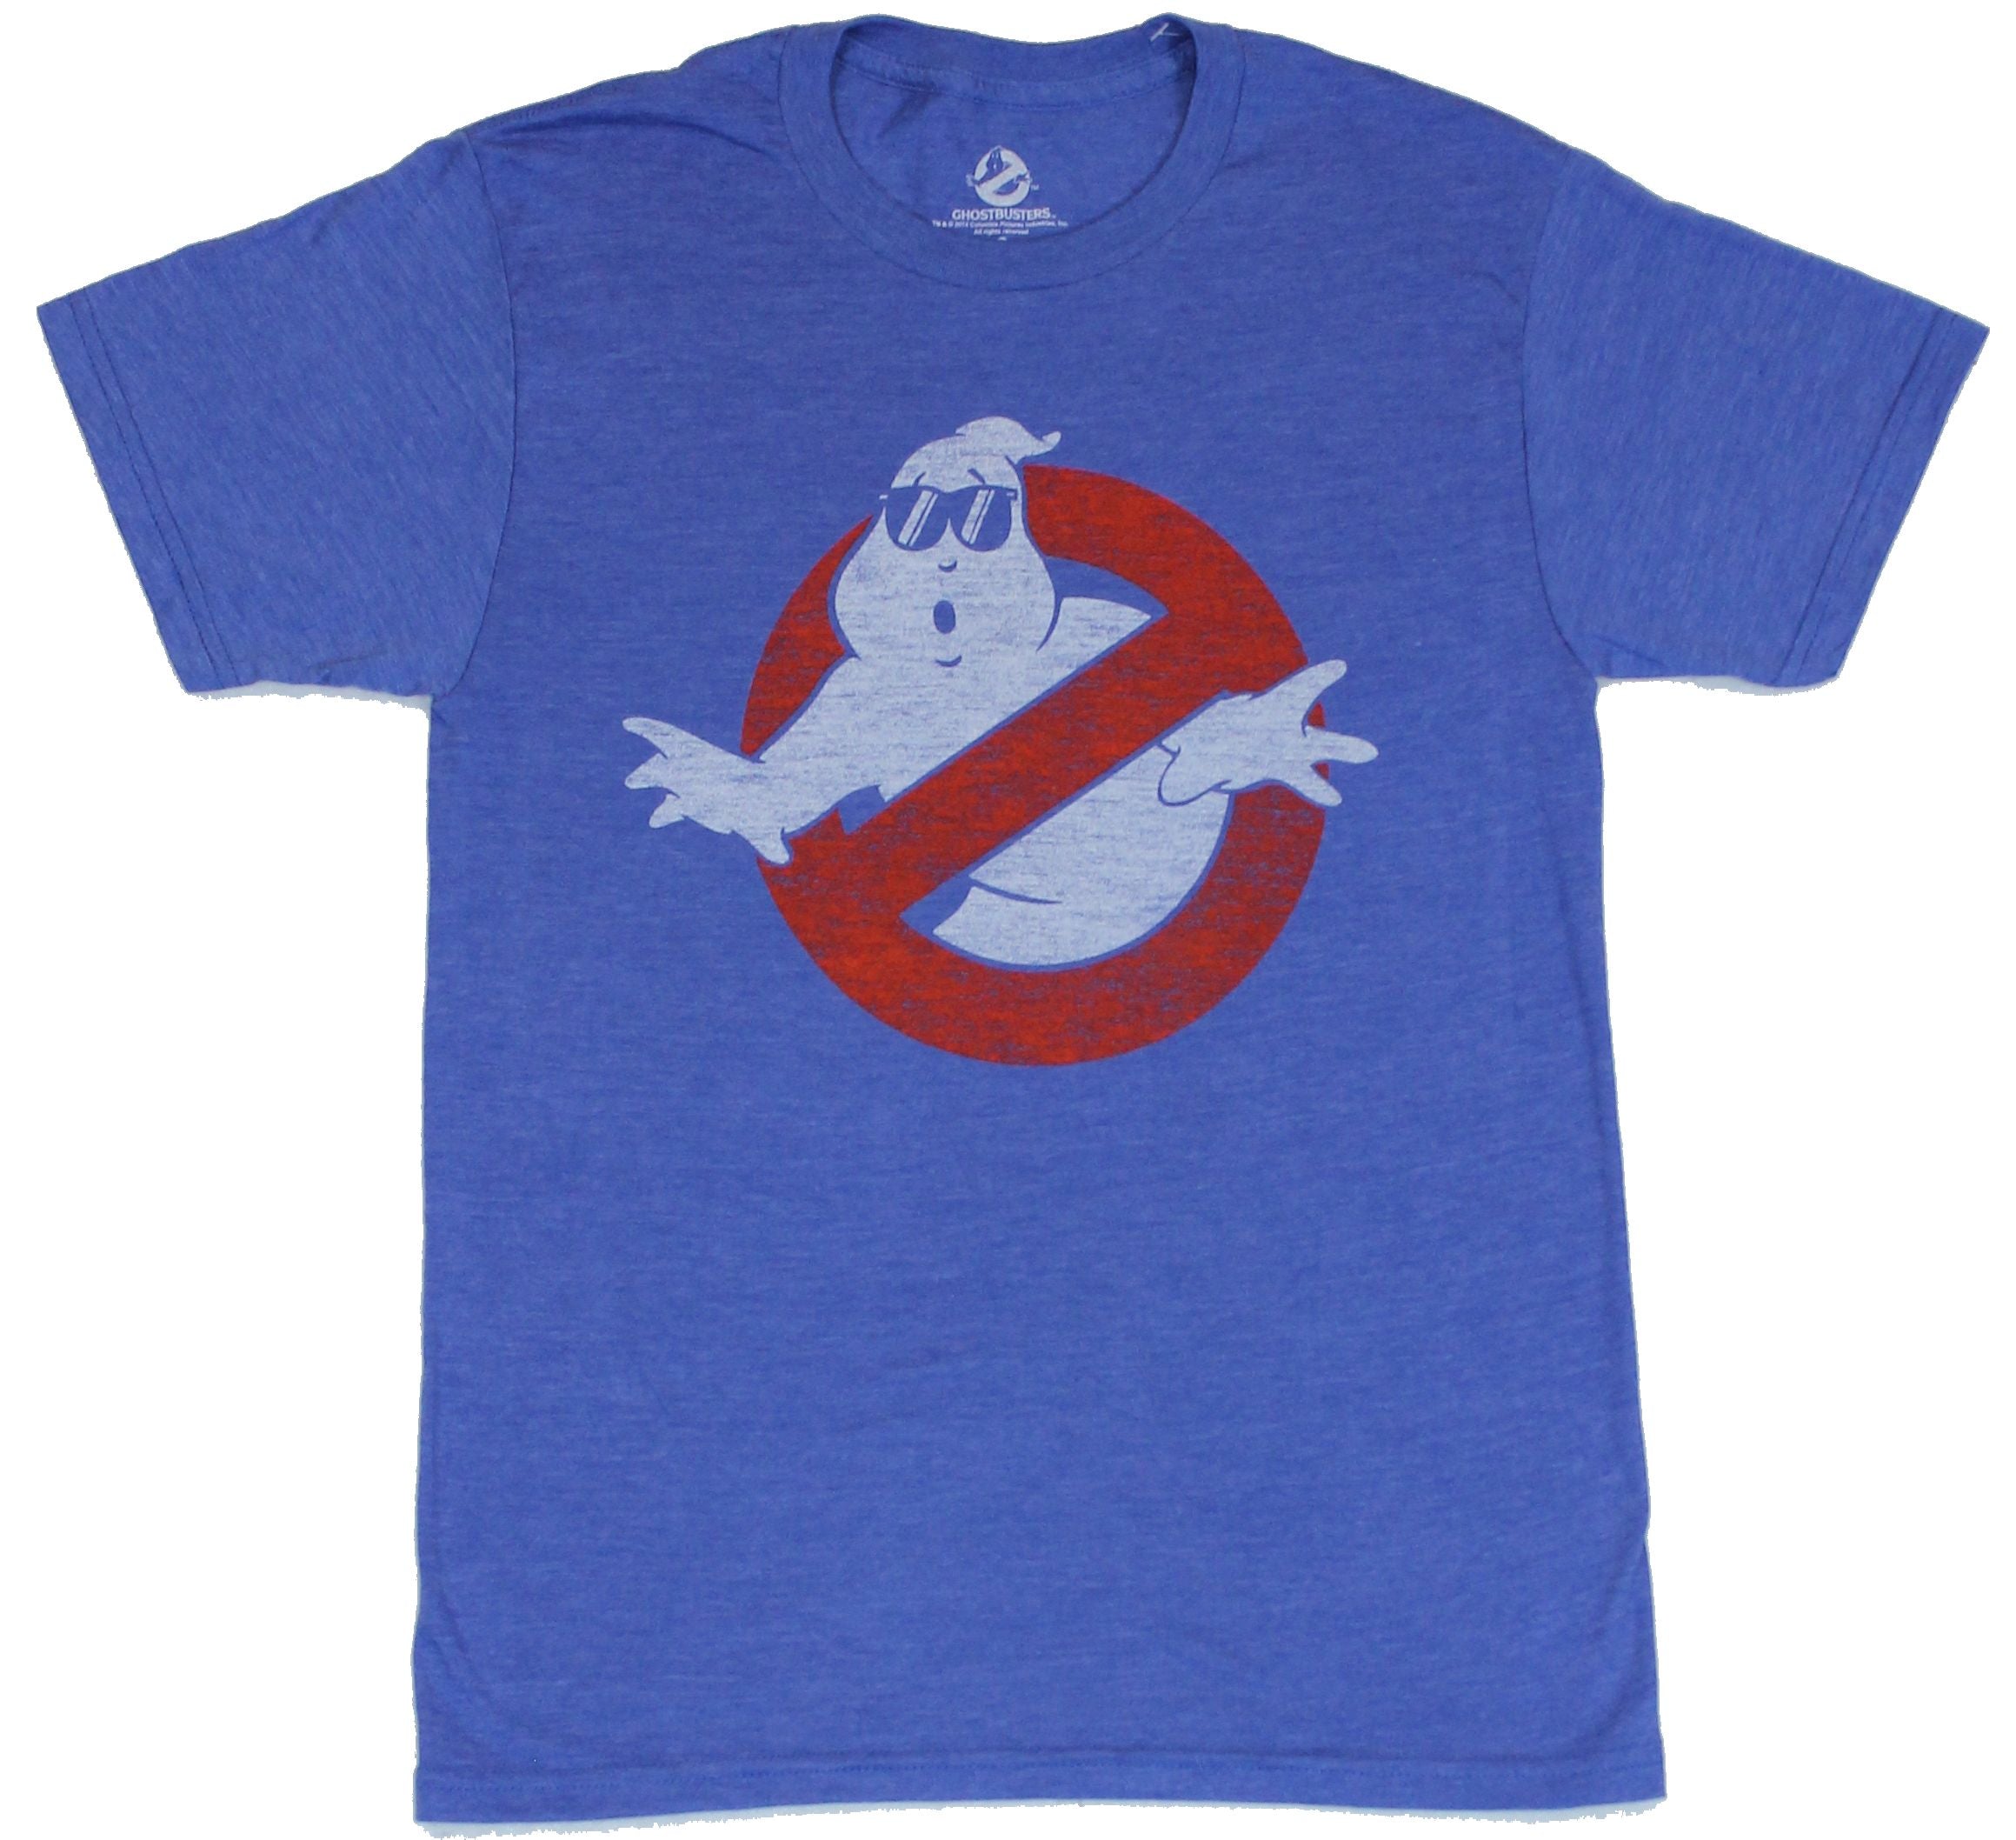 Ghostbusters Mens T-Shirt - Distressed No Ghost Sunglasses Weaing Image